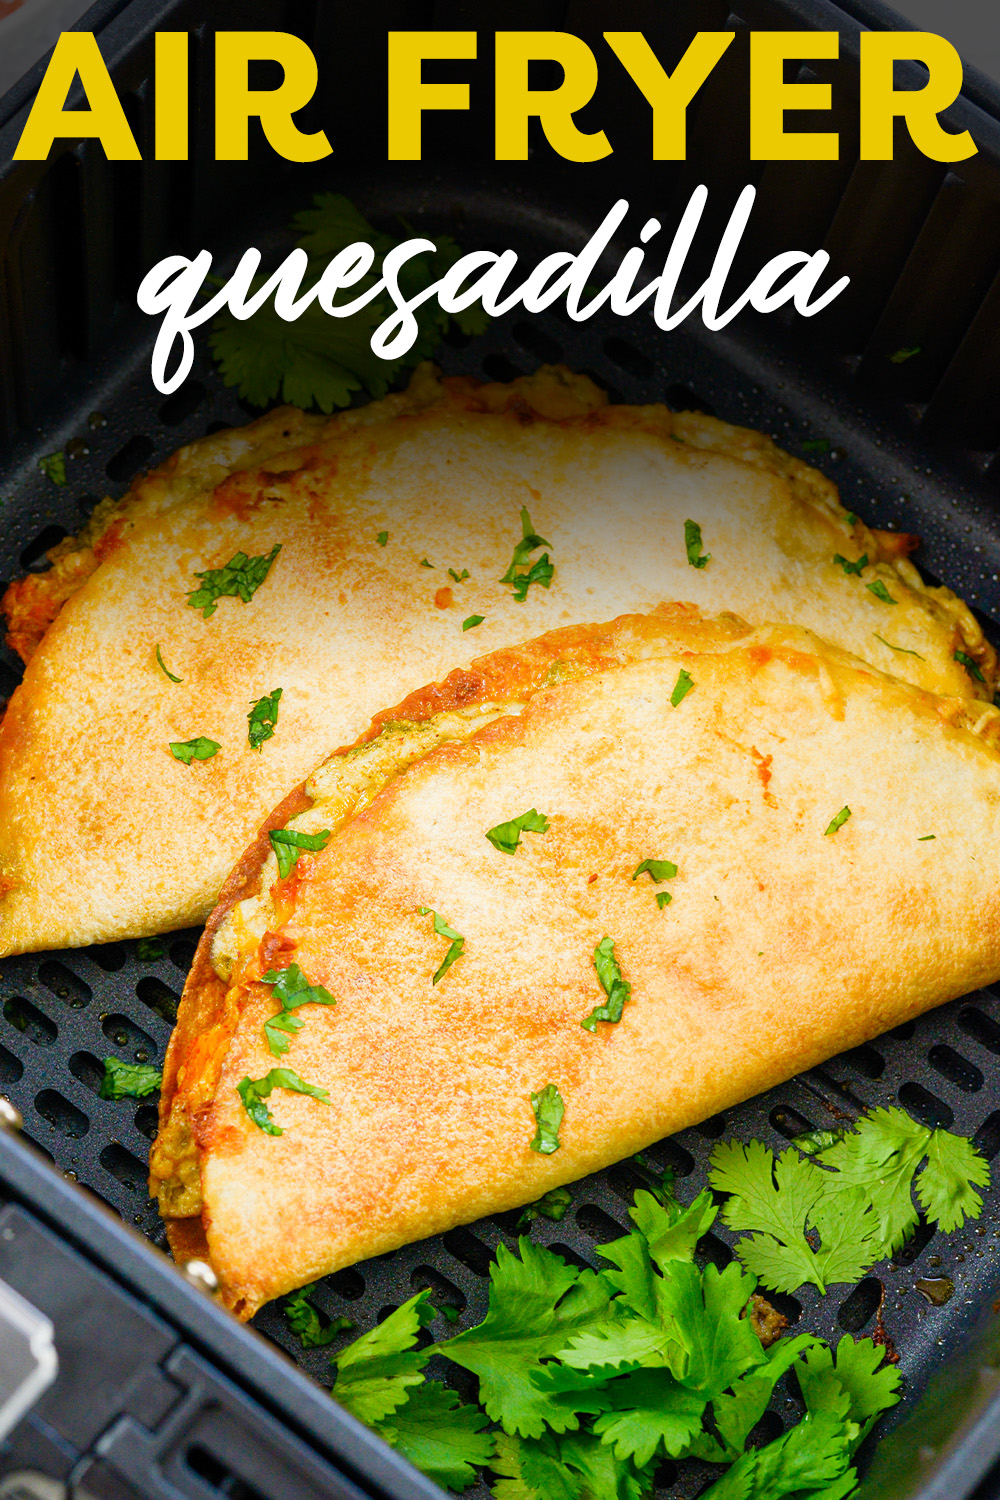 The air fryer quesadilla is so buttery, crispy, and flavorful!  This recipe is so simple and foolproof, it is a go to air fryer recipe for me!